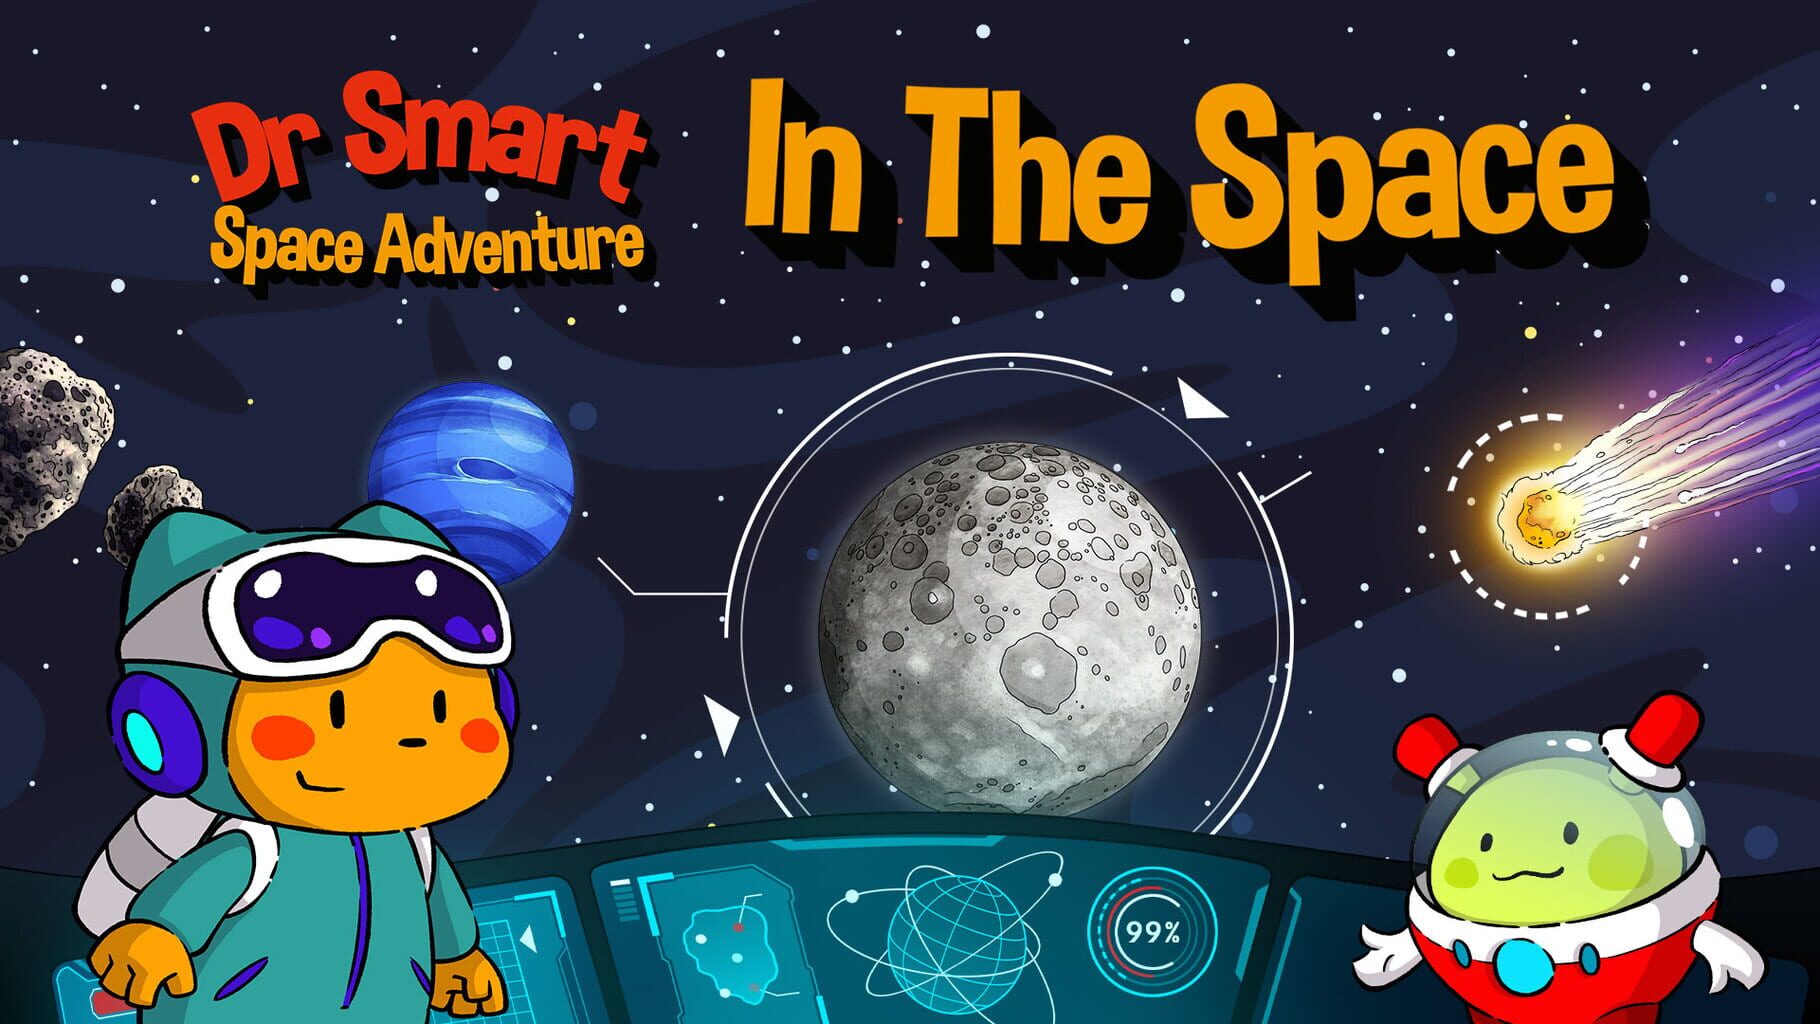 Arte - Dr. Smart Space Adventure: In the Space